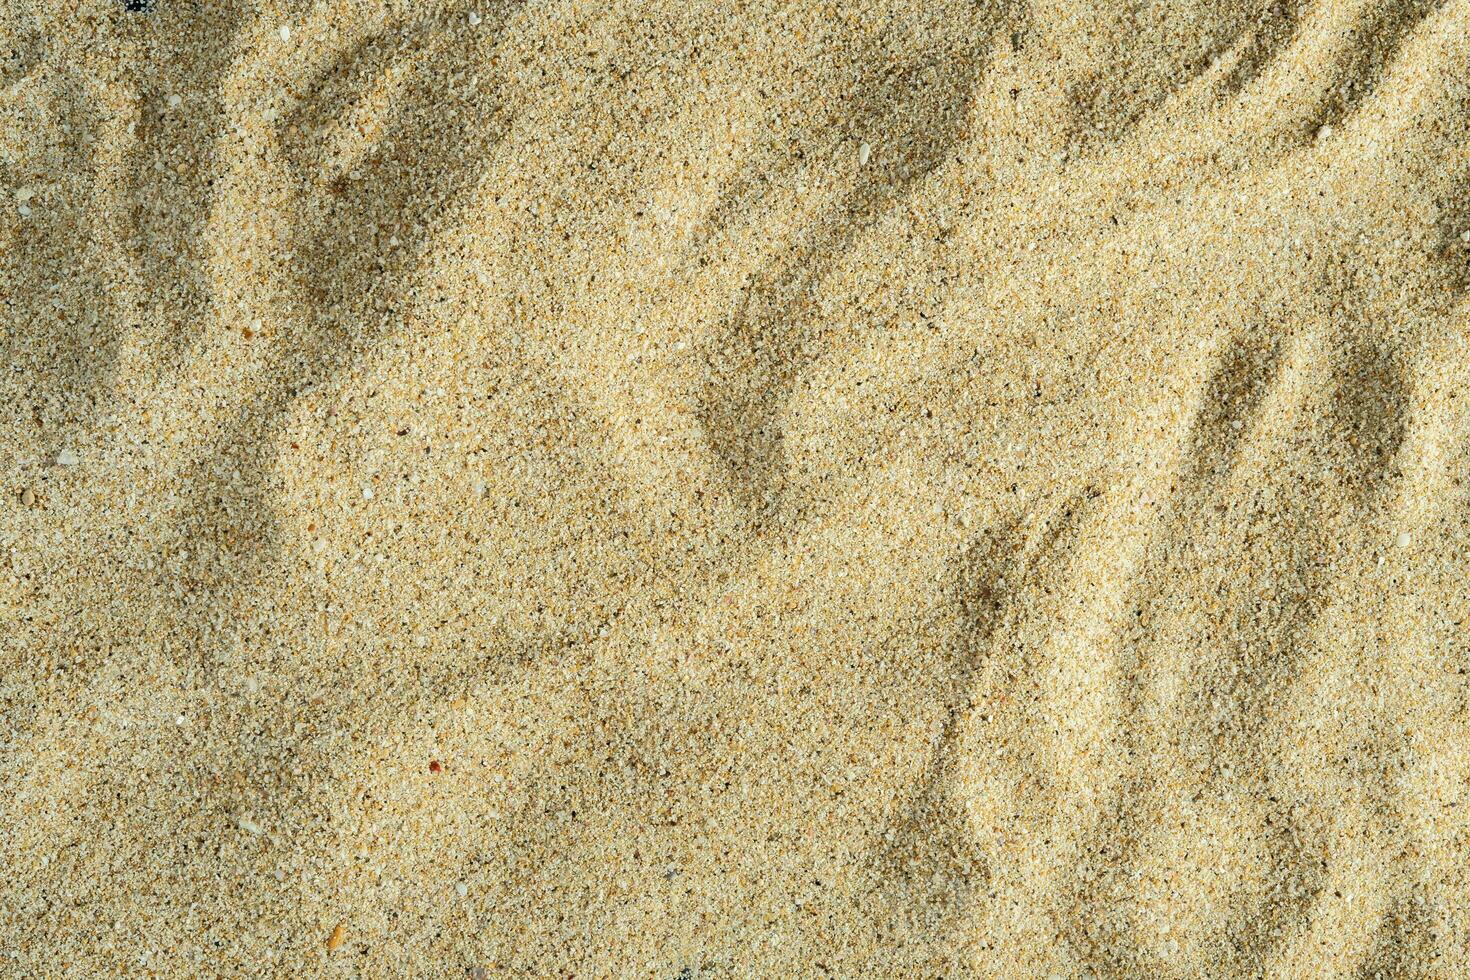 Abstract beach sand texture background photo